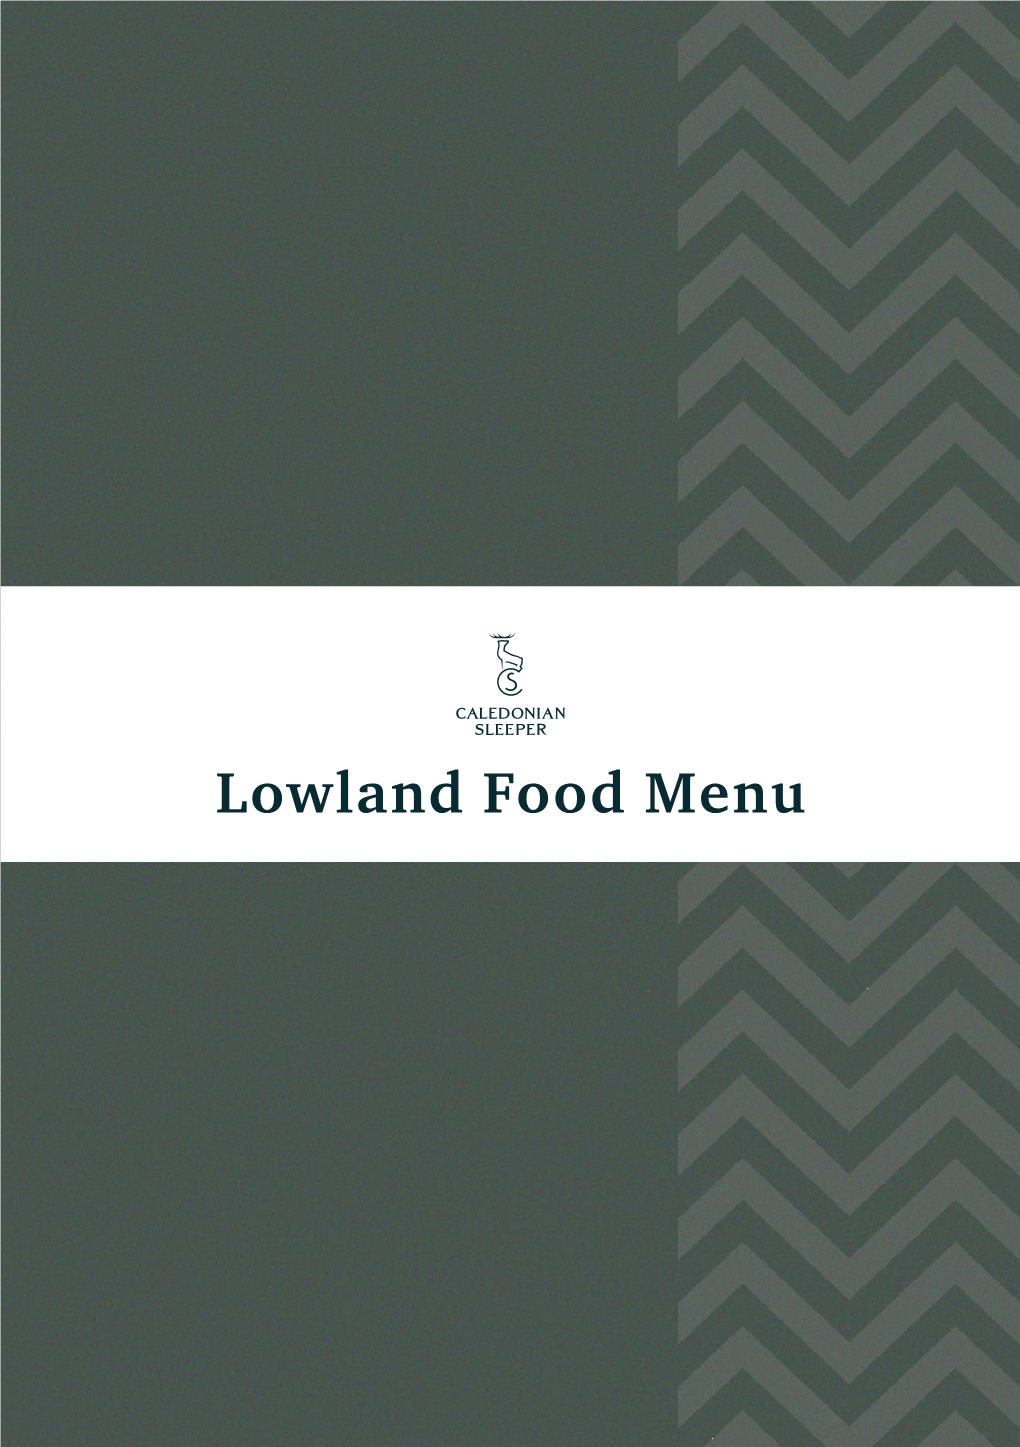 Lowland Food Menu Food Has That Magical Ability to Transport Us Somewhere Else – Not Unlike Caledonian Sleeper